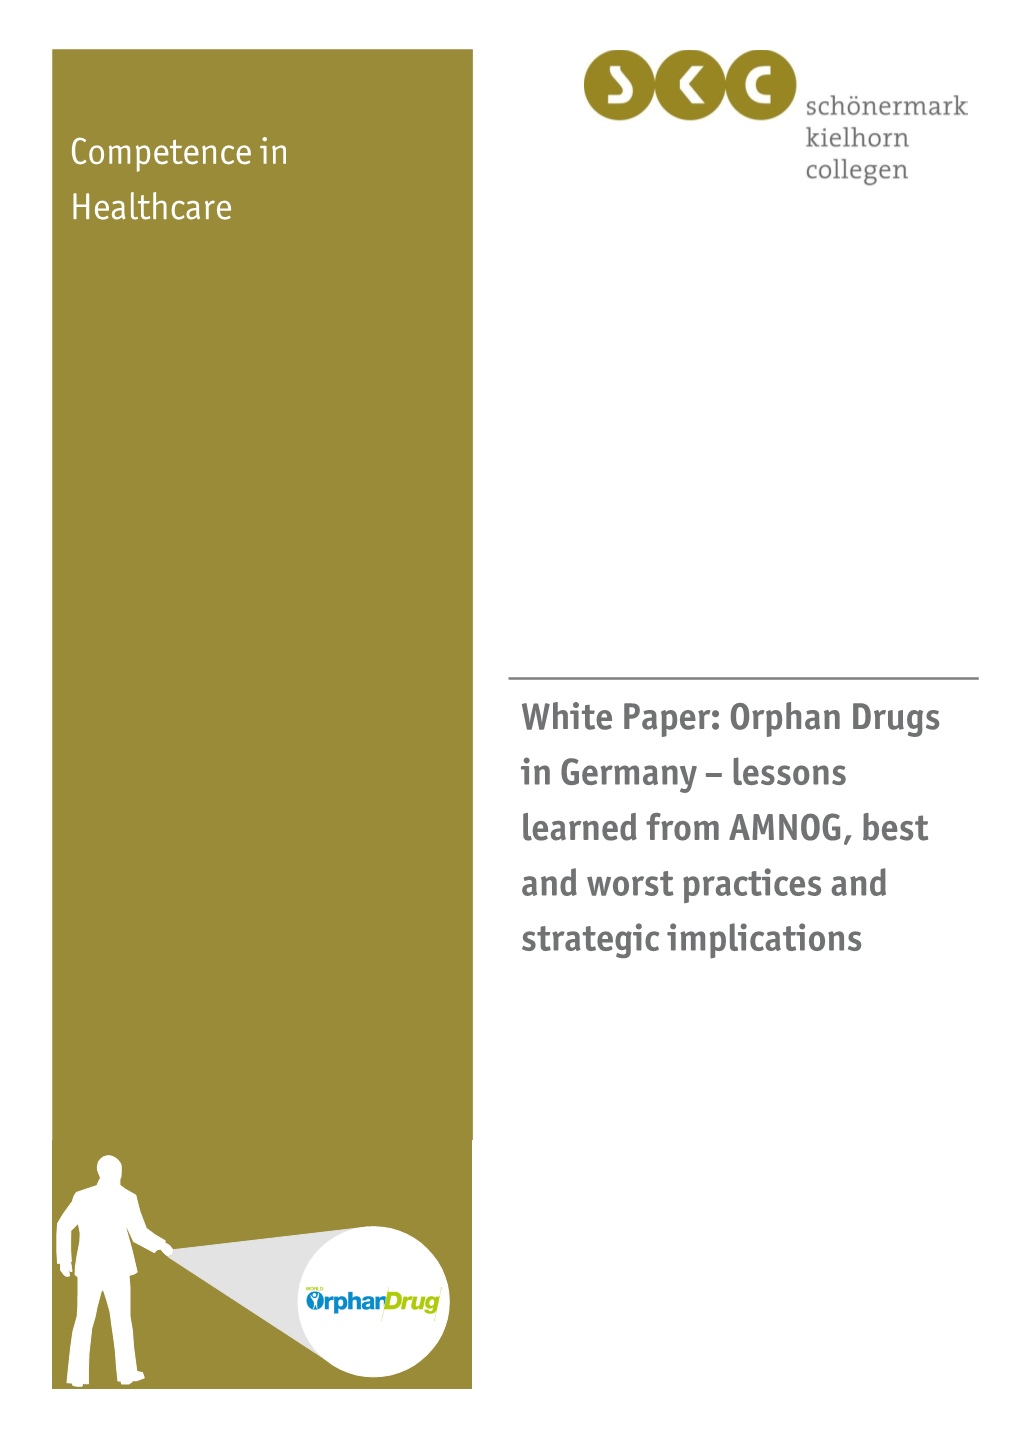 Orphan Drugs in Germany – Lessons Learned from AMNOG, Best and Worst Practices and Strategic Implications